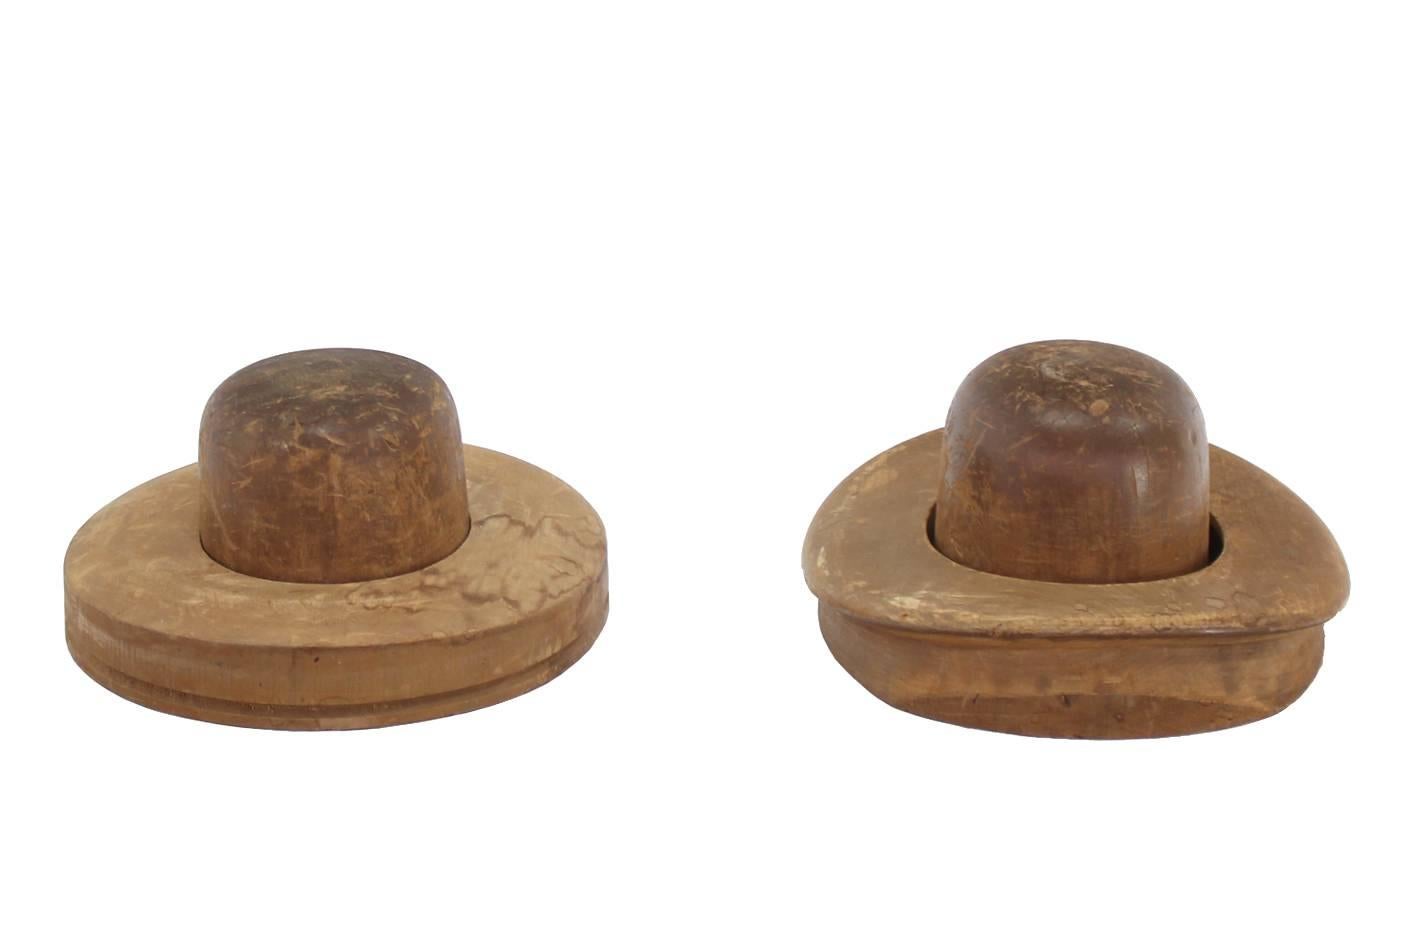 Pair of vintage or antique hat forms, dress forms.